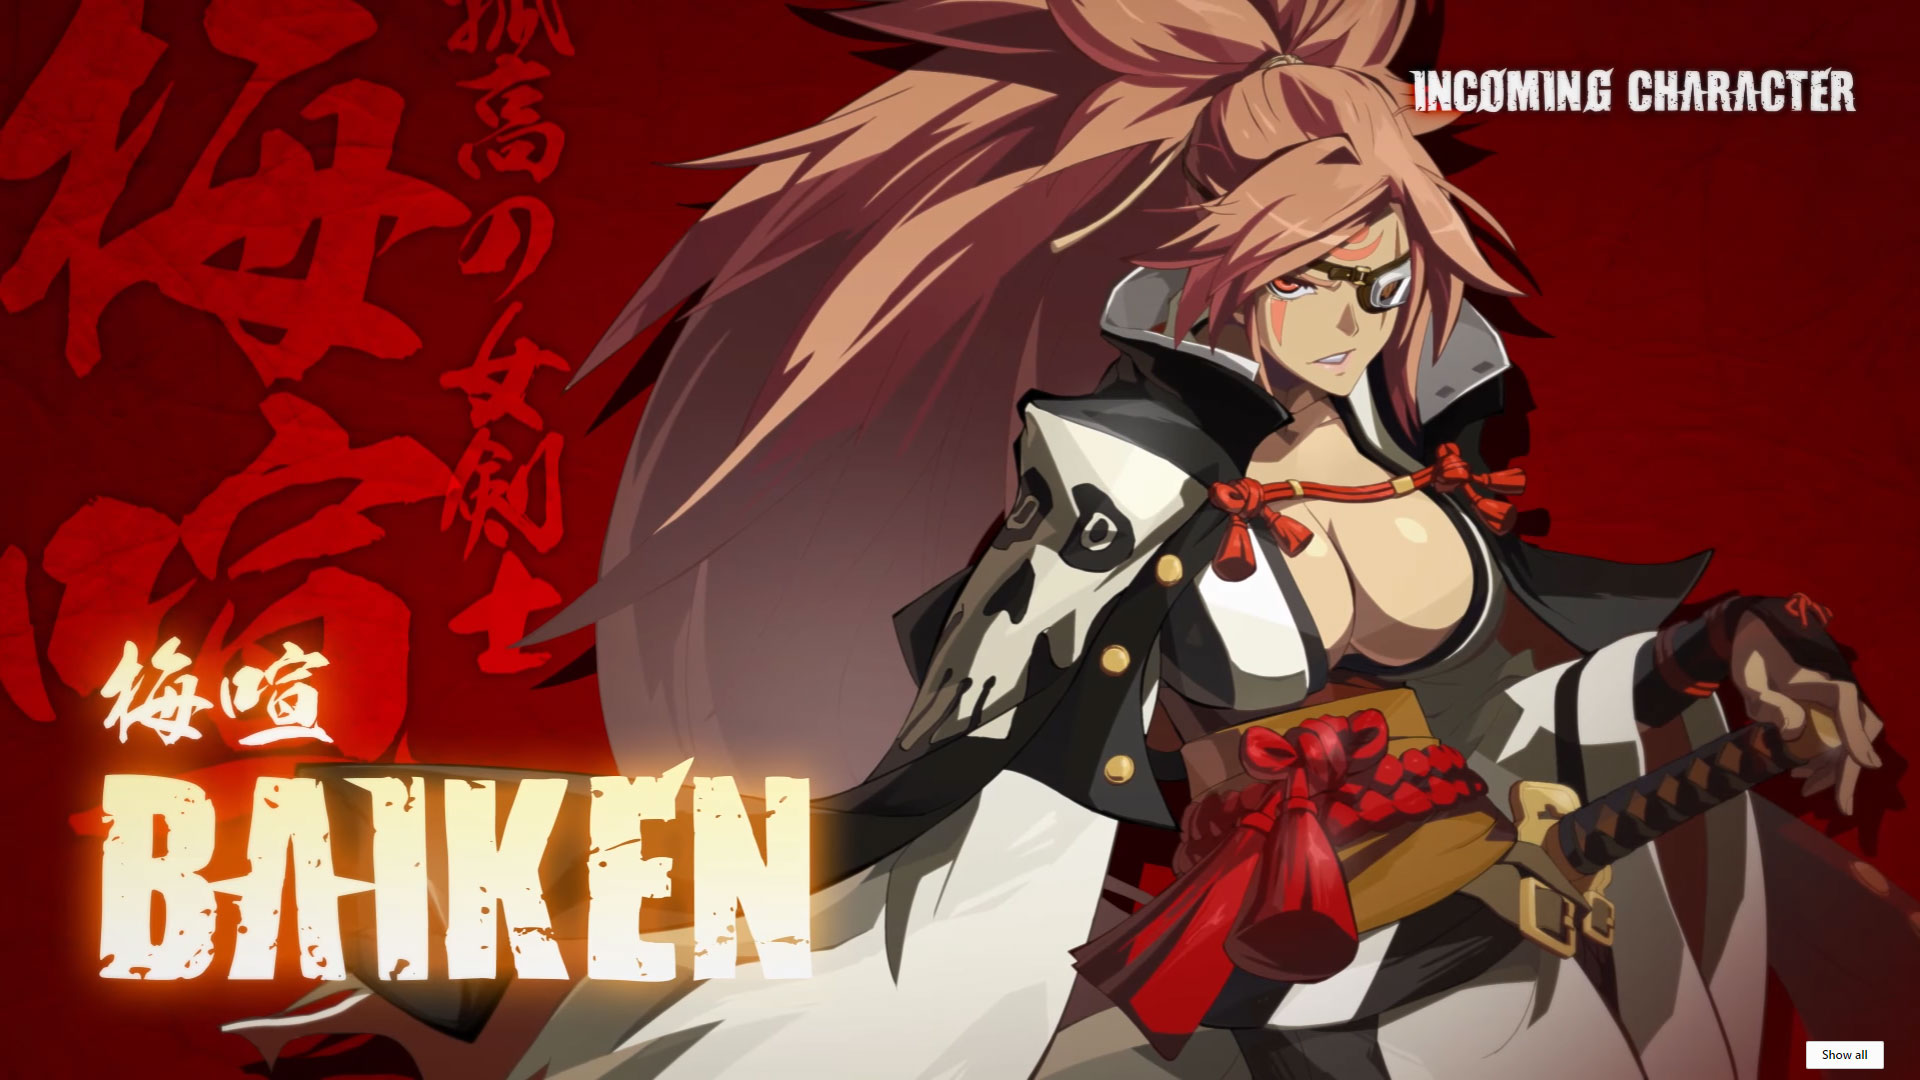 Guilty Gear Xrd Rev 2 Coming to Arcades this Spring